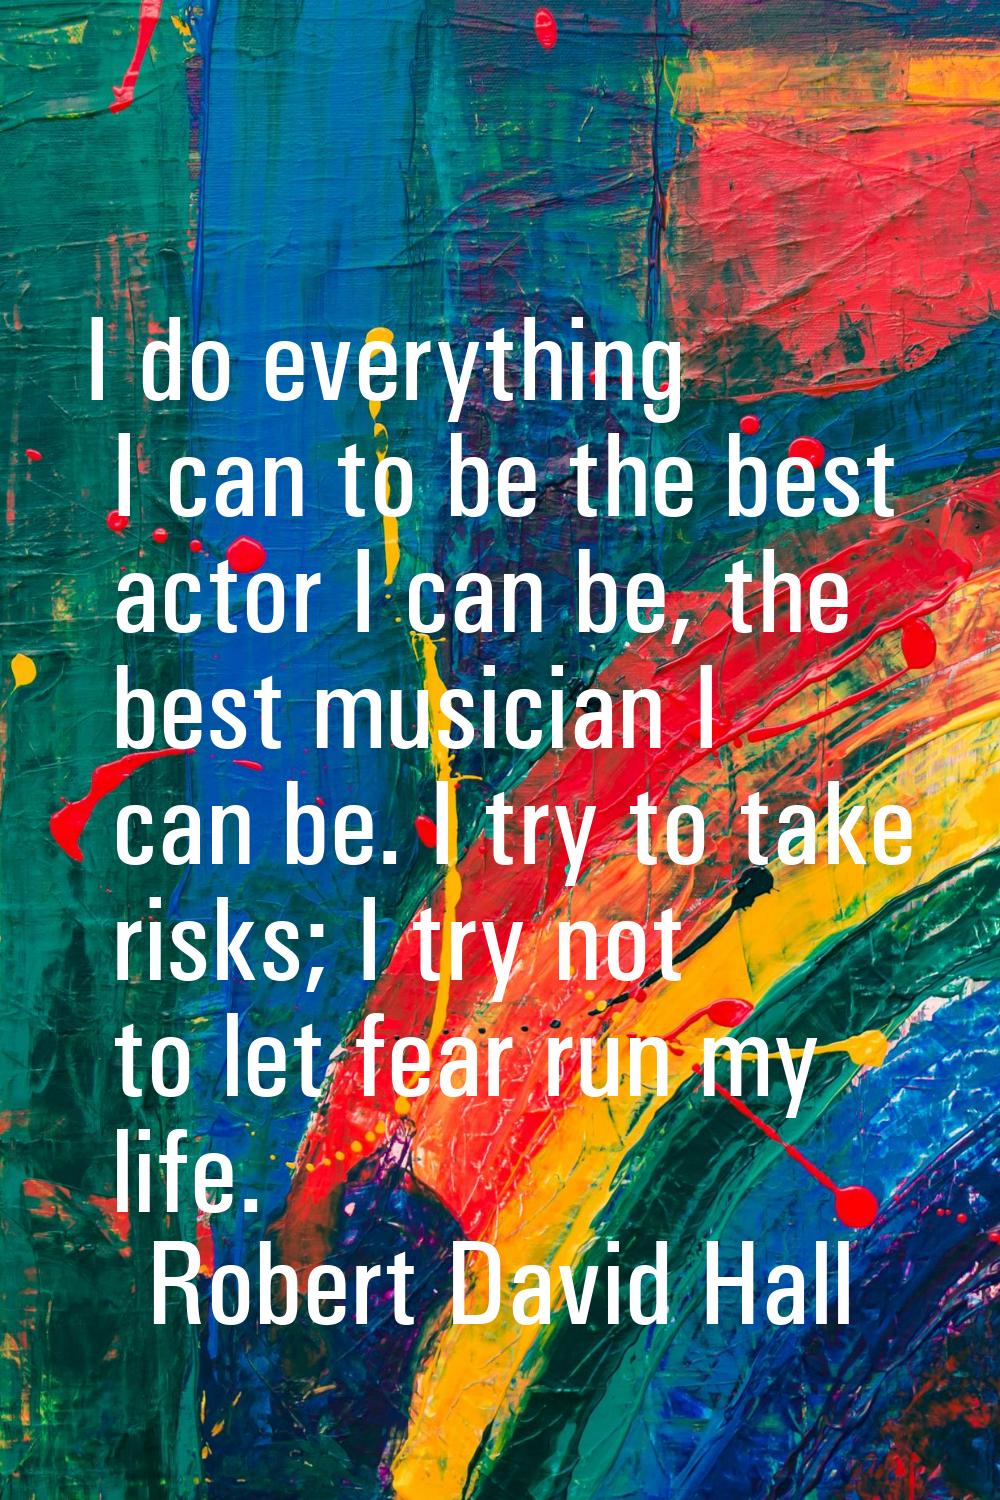 I do everything I can to be the best actor I can be, the best musician I can be. I try to take risk